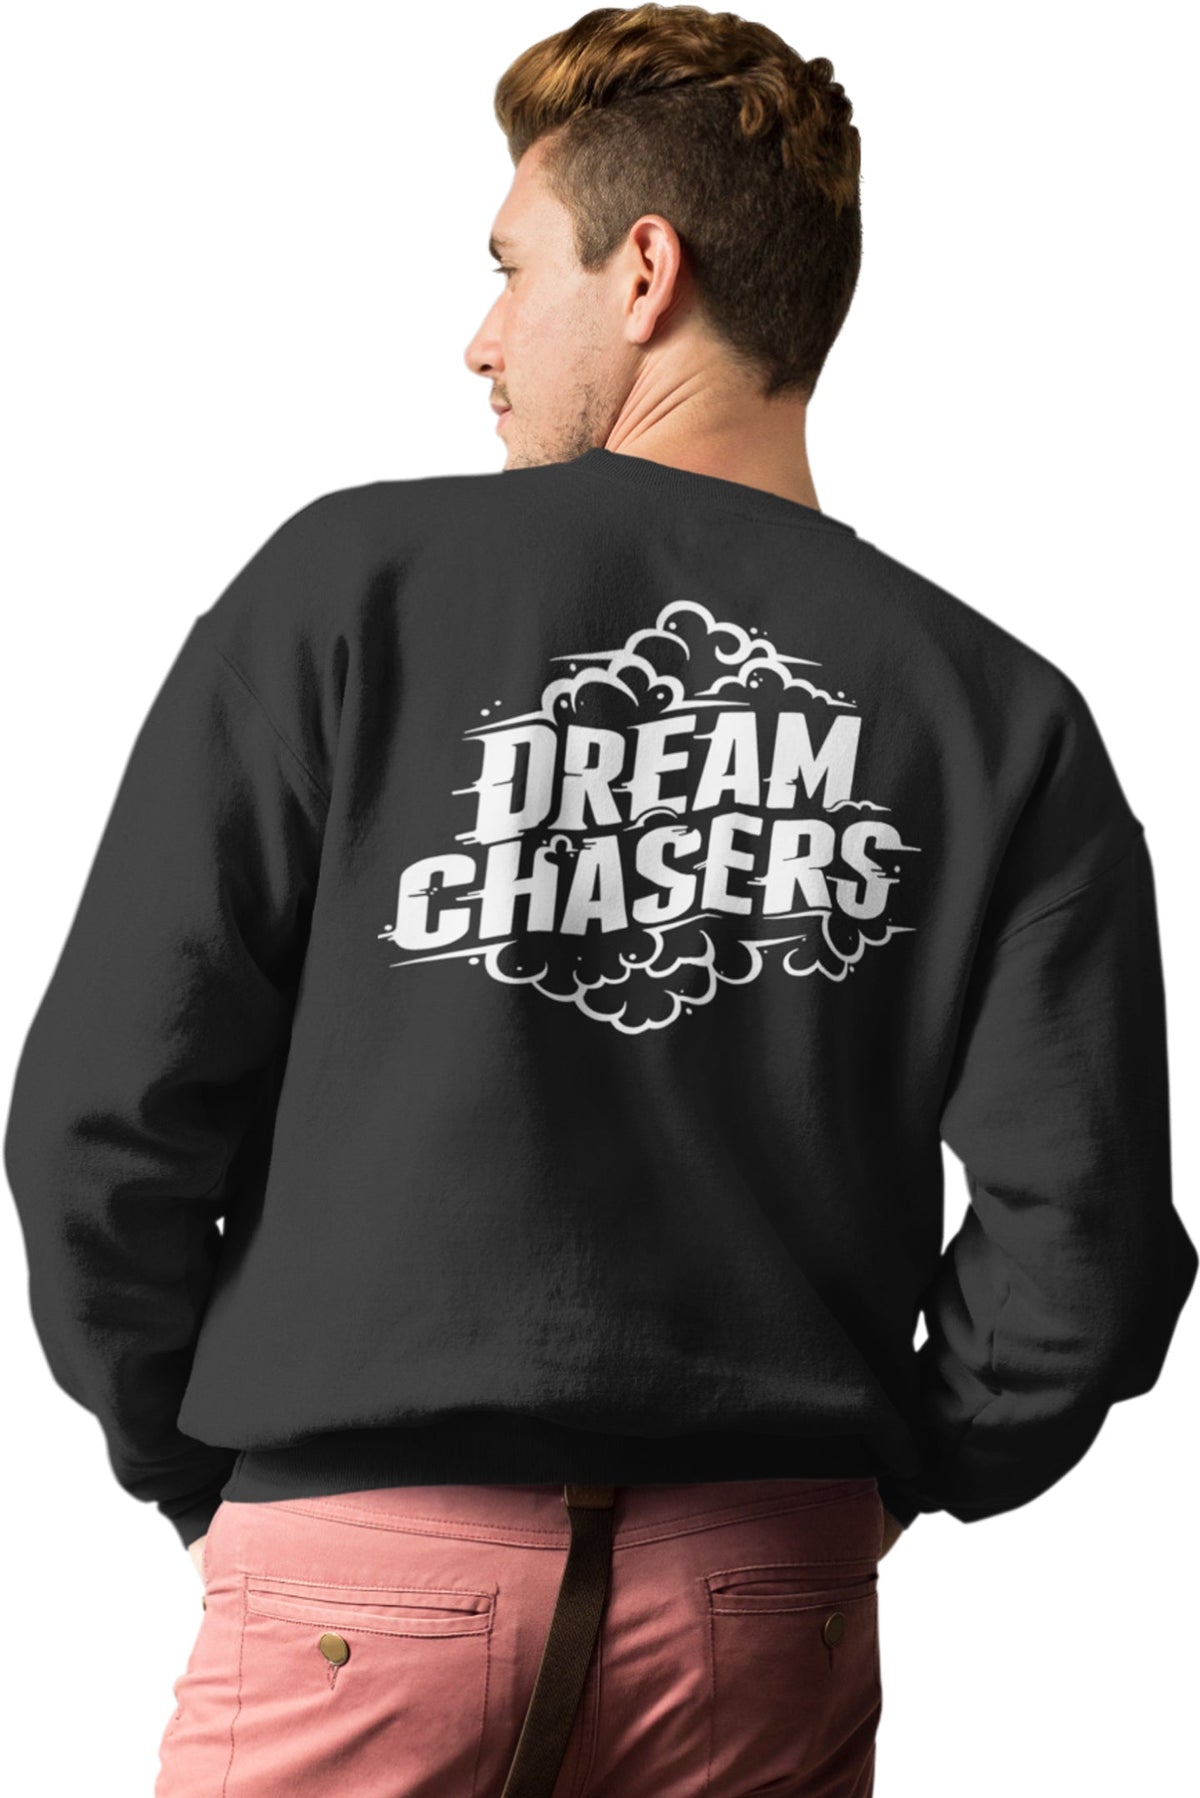 Dream Chaser Relaxed Fit Sweatshirt For Men